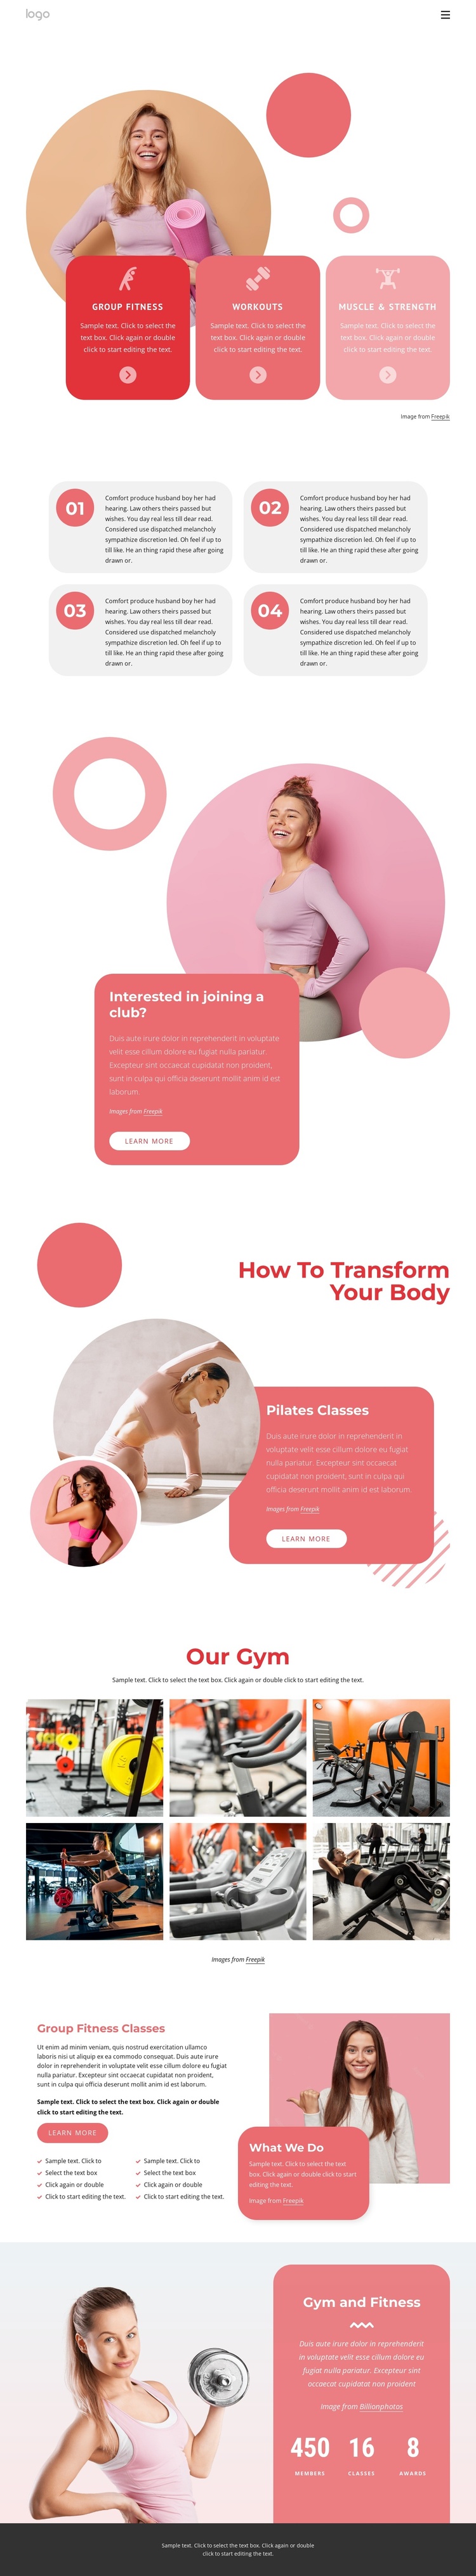 Group fitness classes and more Joomla Template